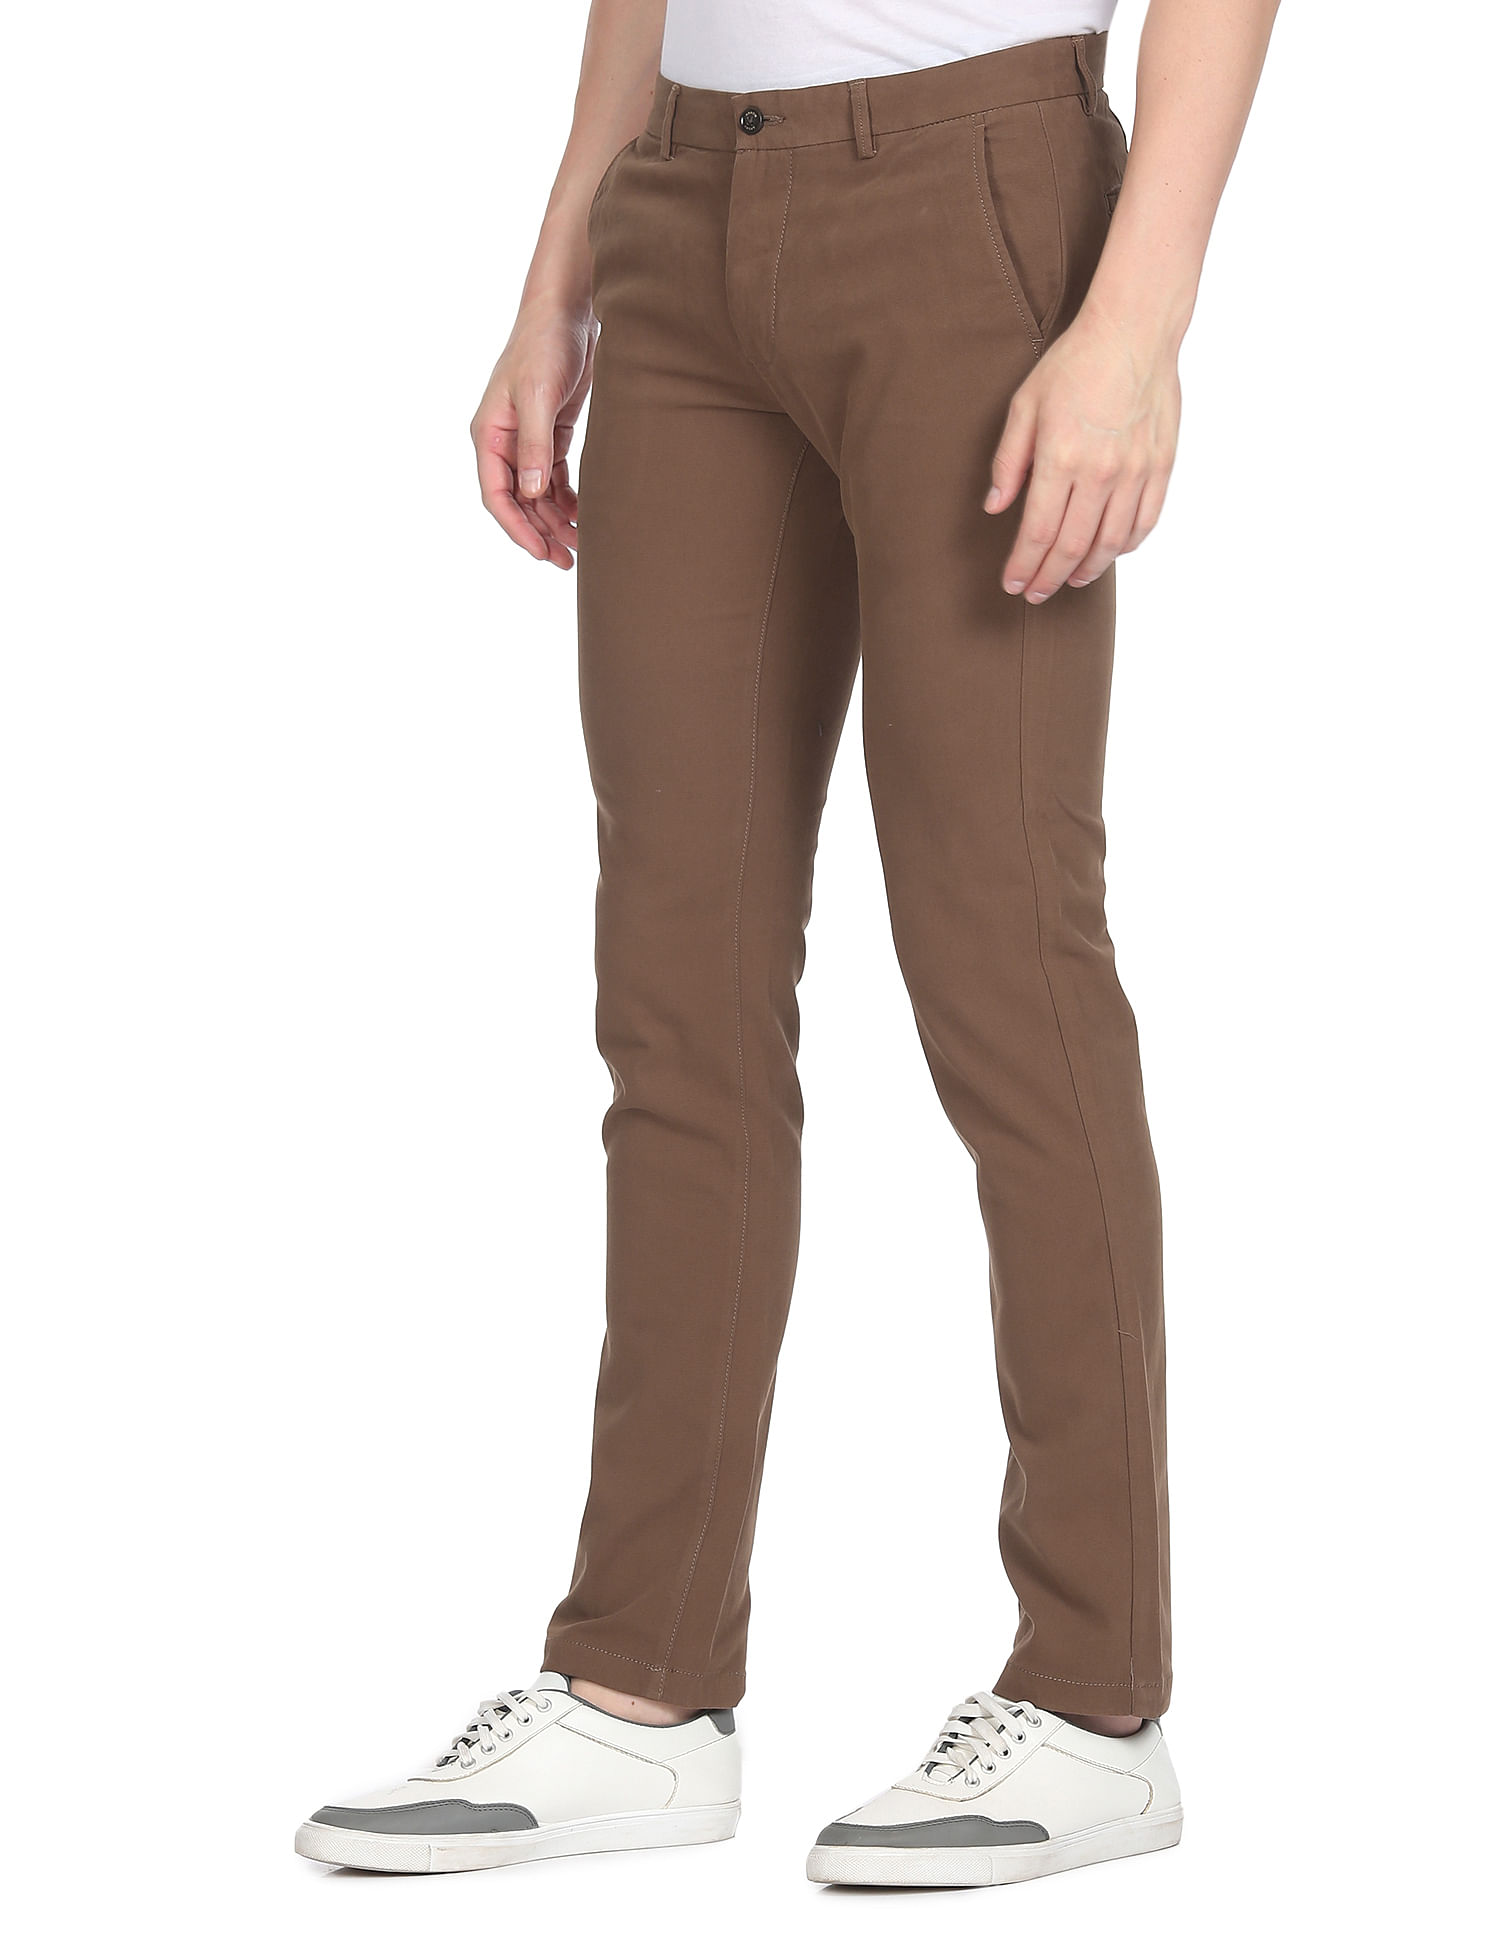 Buy Arrow Sports Bronson Slim Fit Flat Front Trousers - NNNOW.com